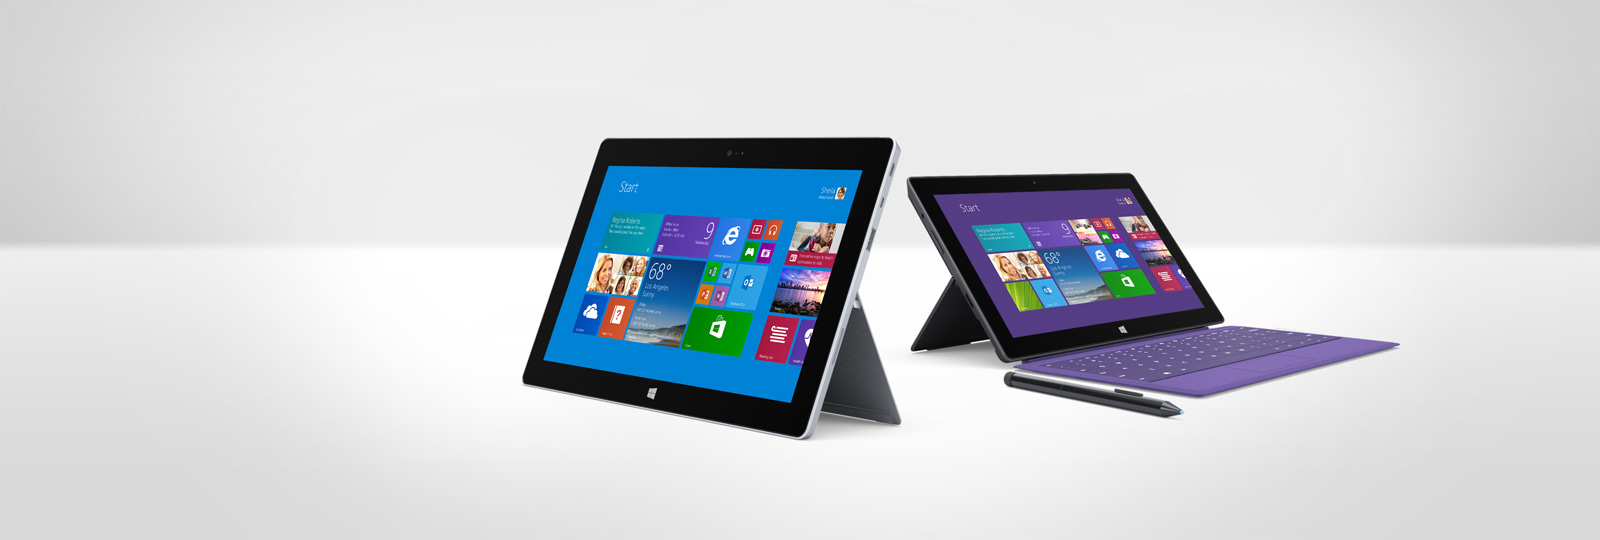 Introducing Surface 2 and Surface Pro 2.